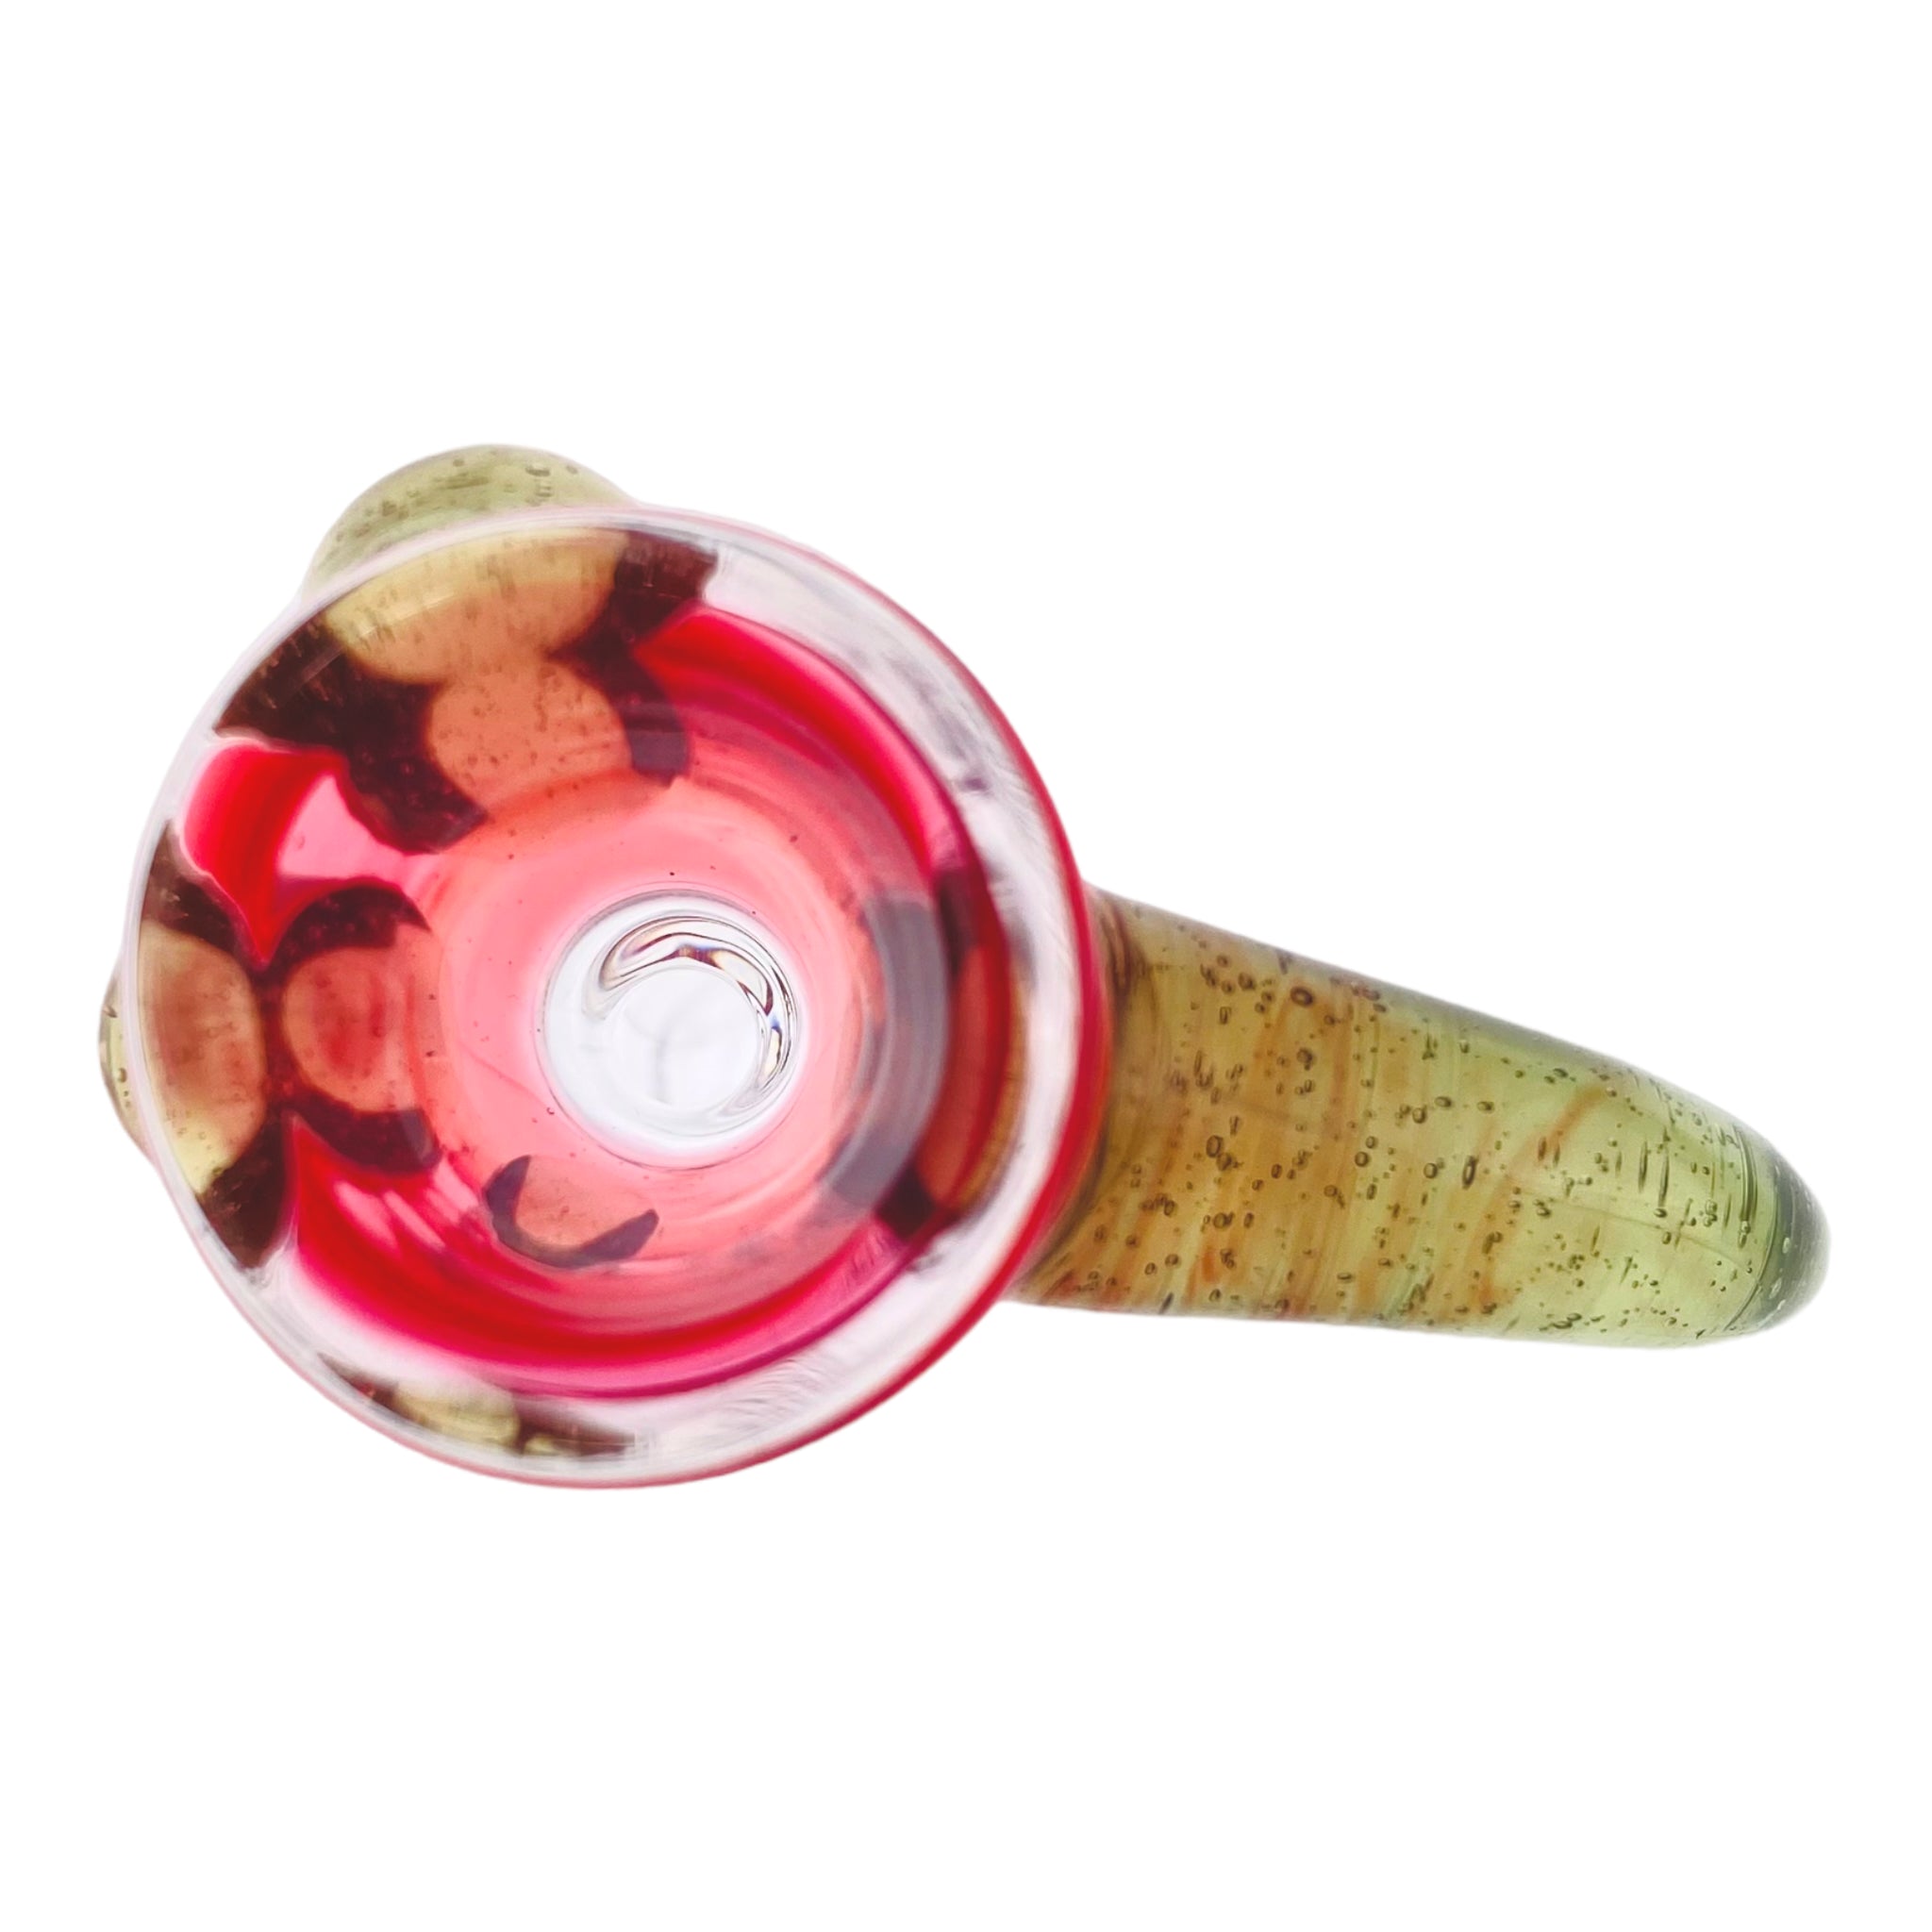 Arko Glass - 14mm Flower Bowl - Crimson Pink With Forest Green Handle & Dots